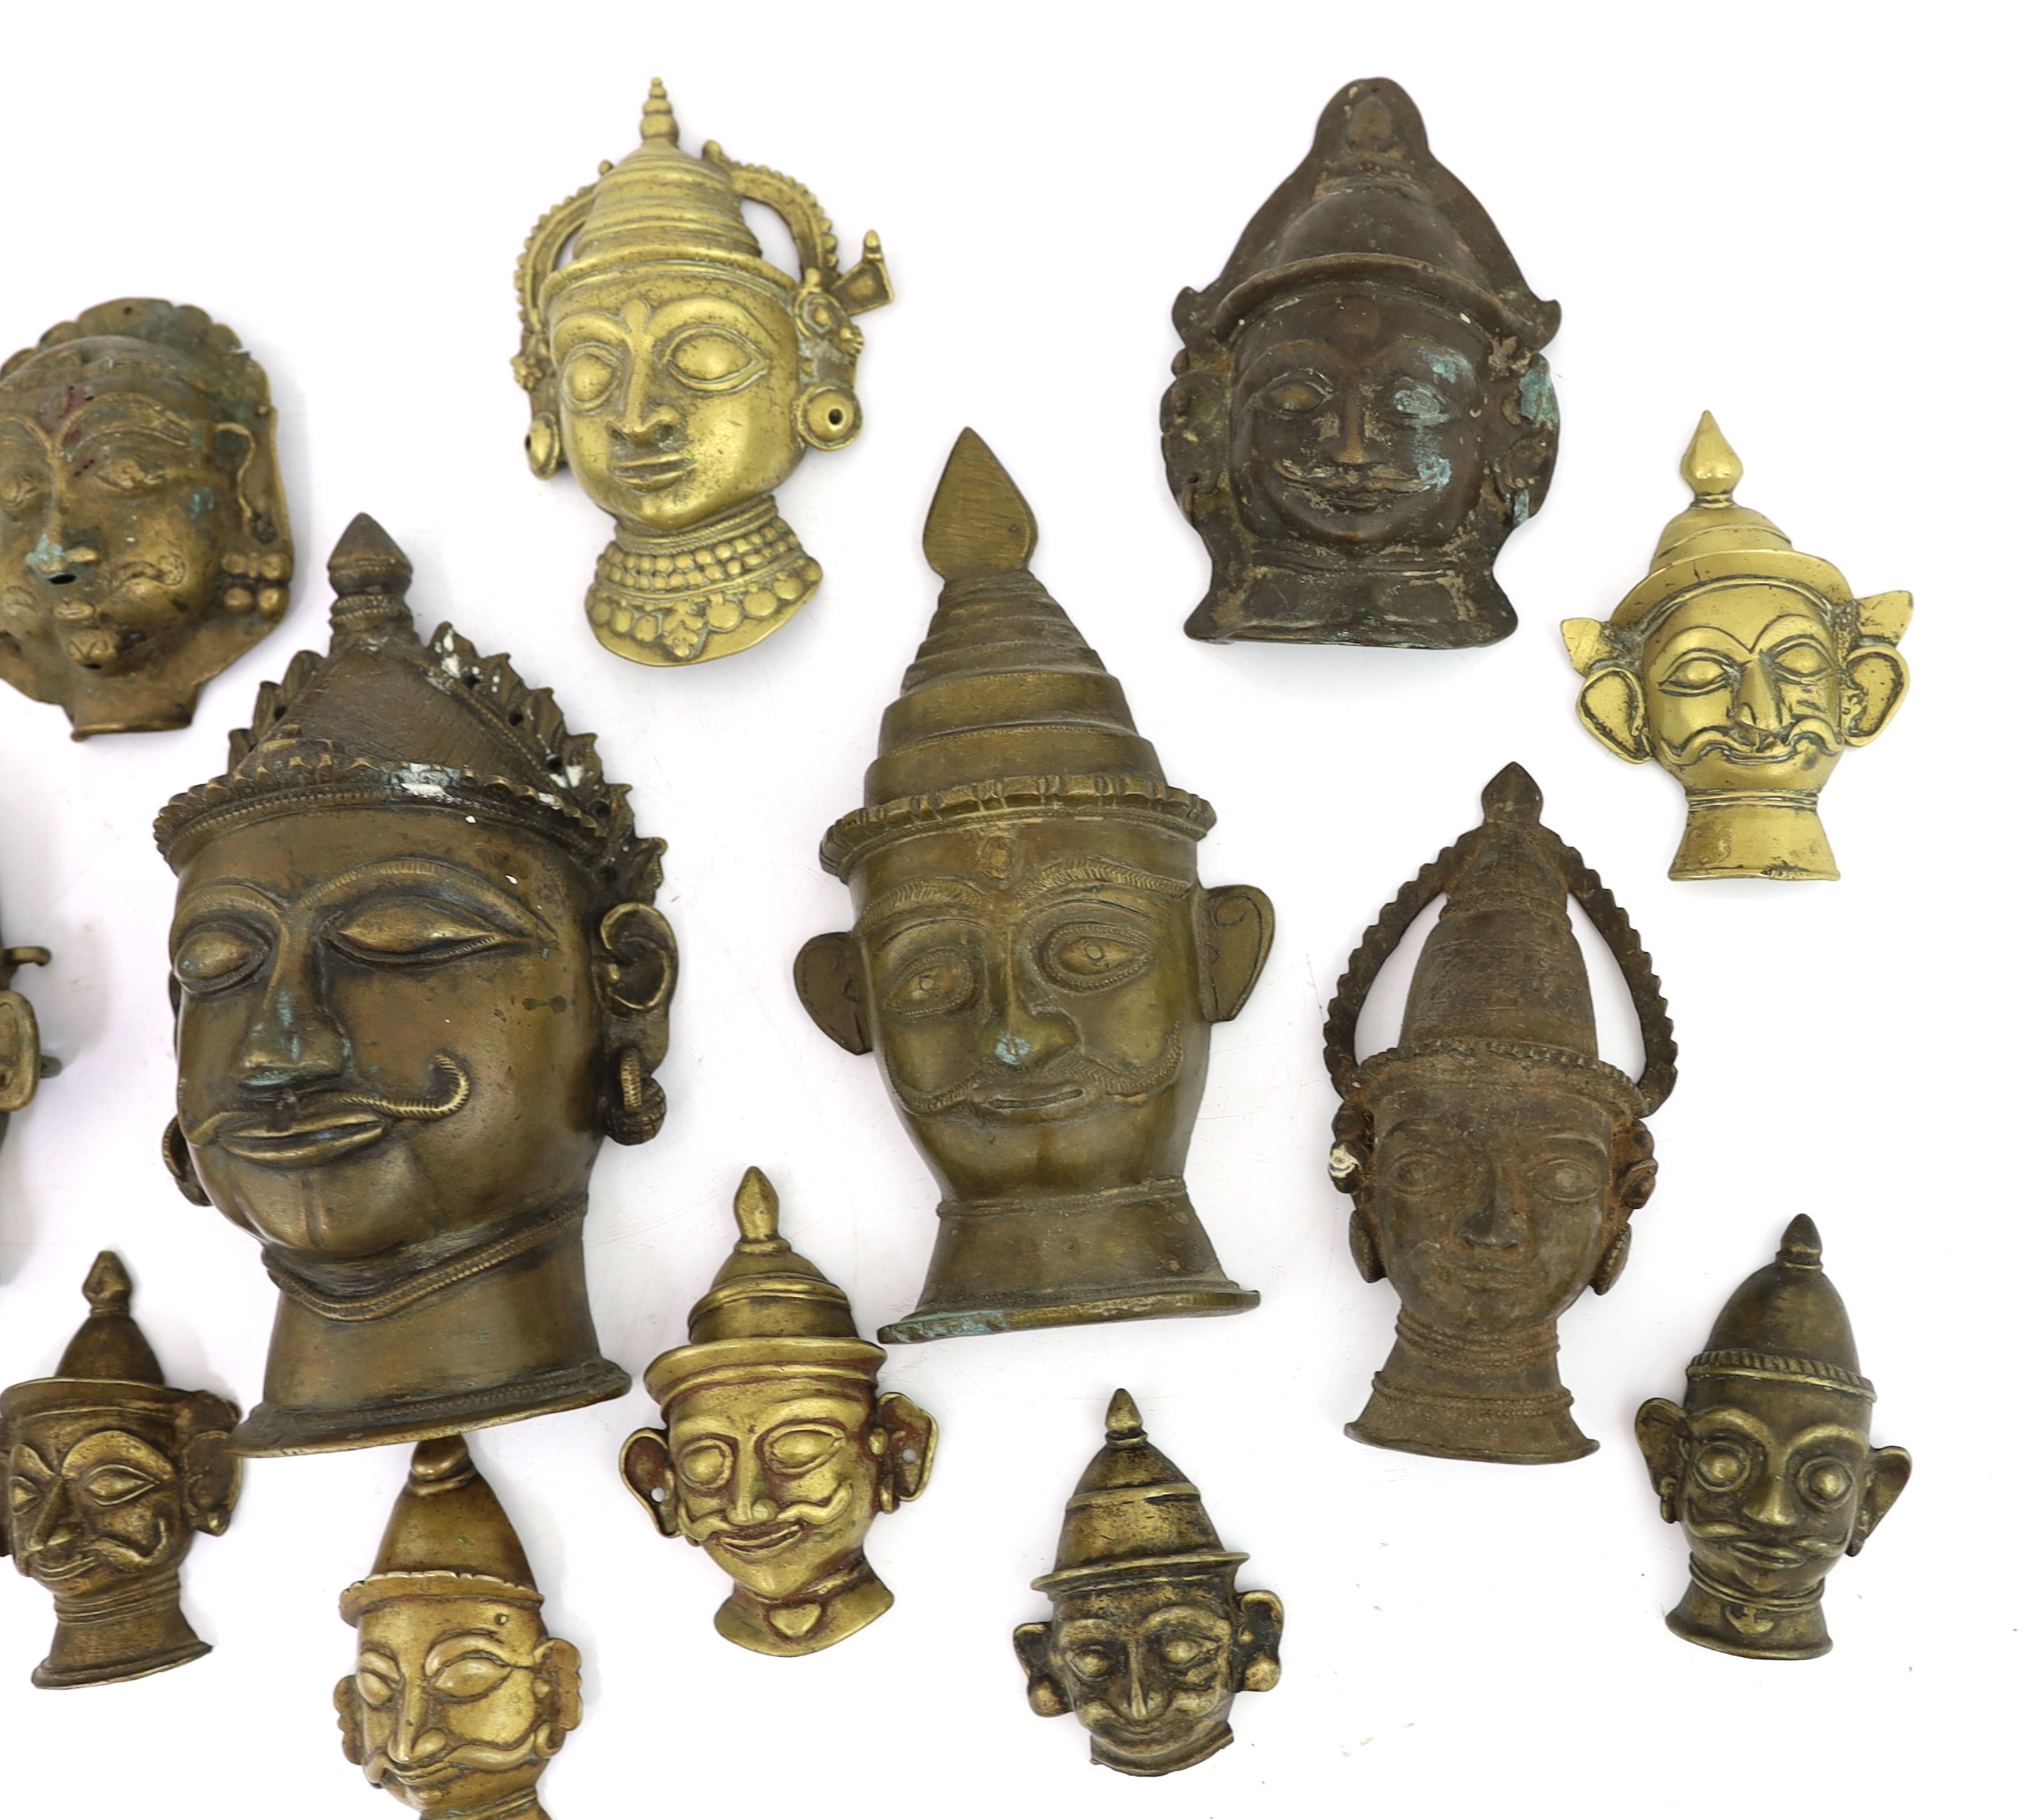 A group of nineteen bronze or brass Shiva masks, Southern India, 16th-19th century, 6.2 - 19.5cm high